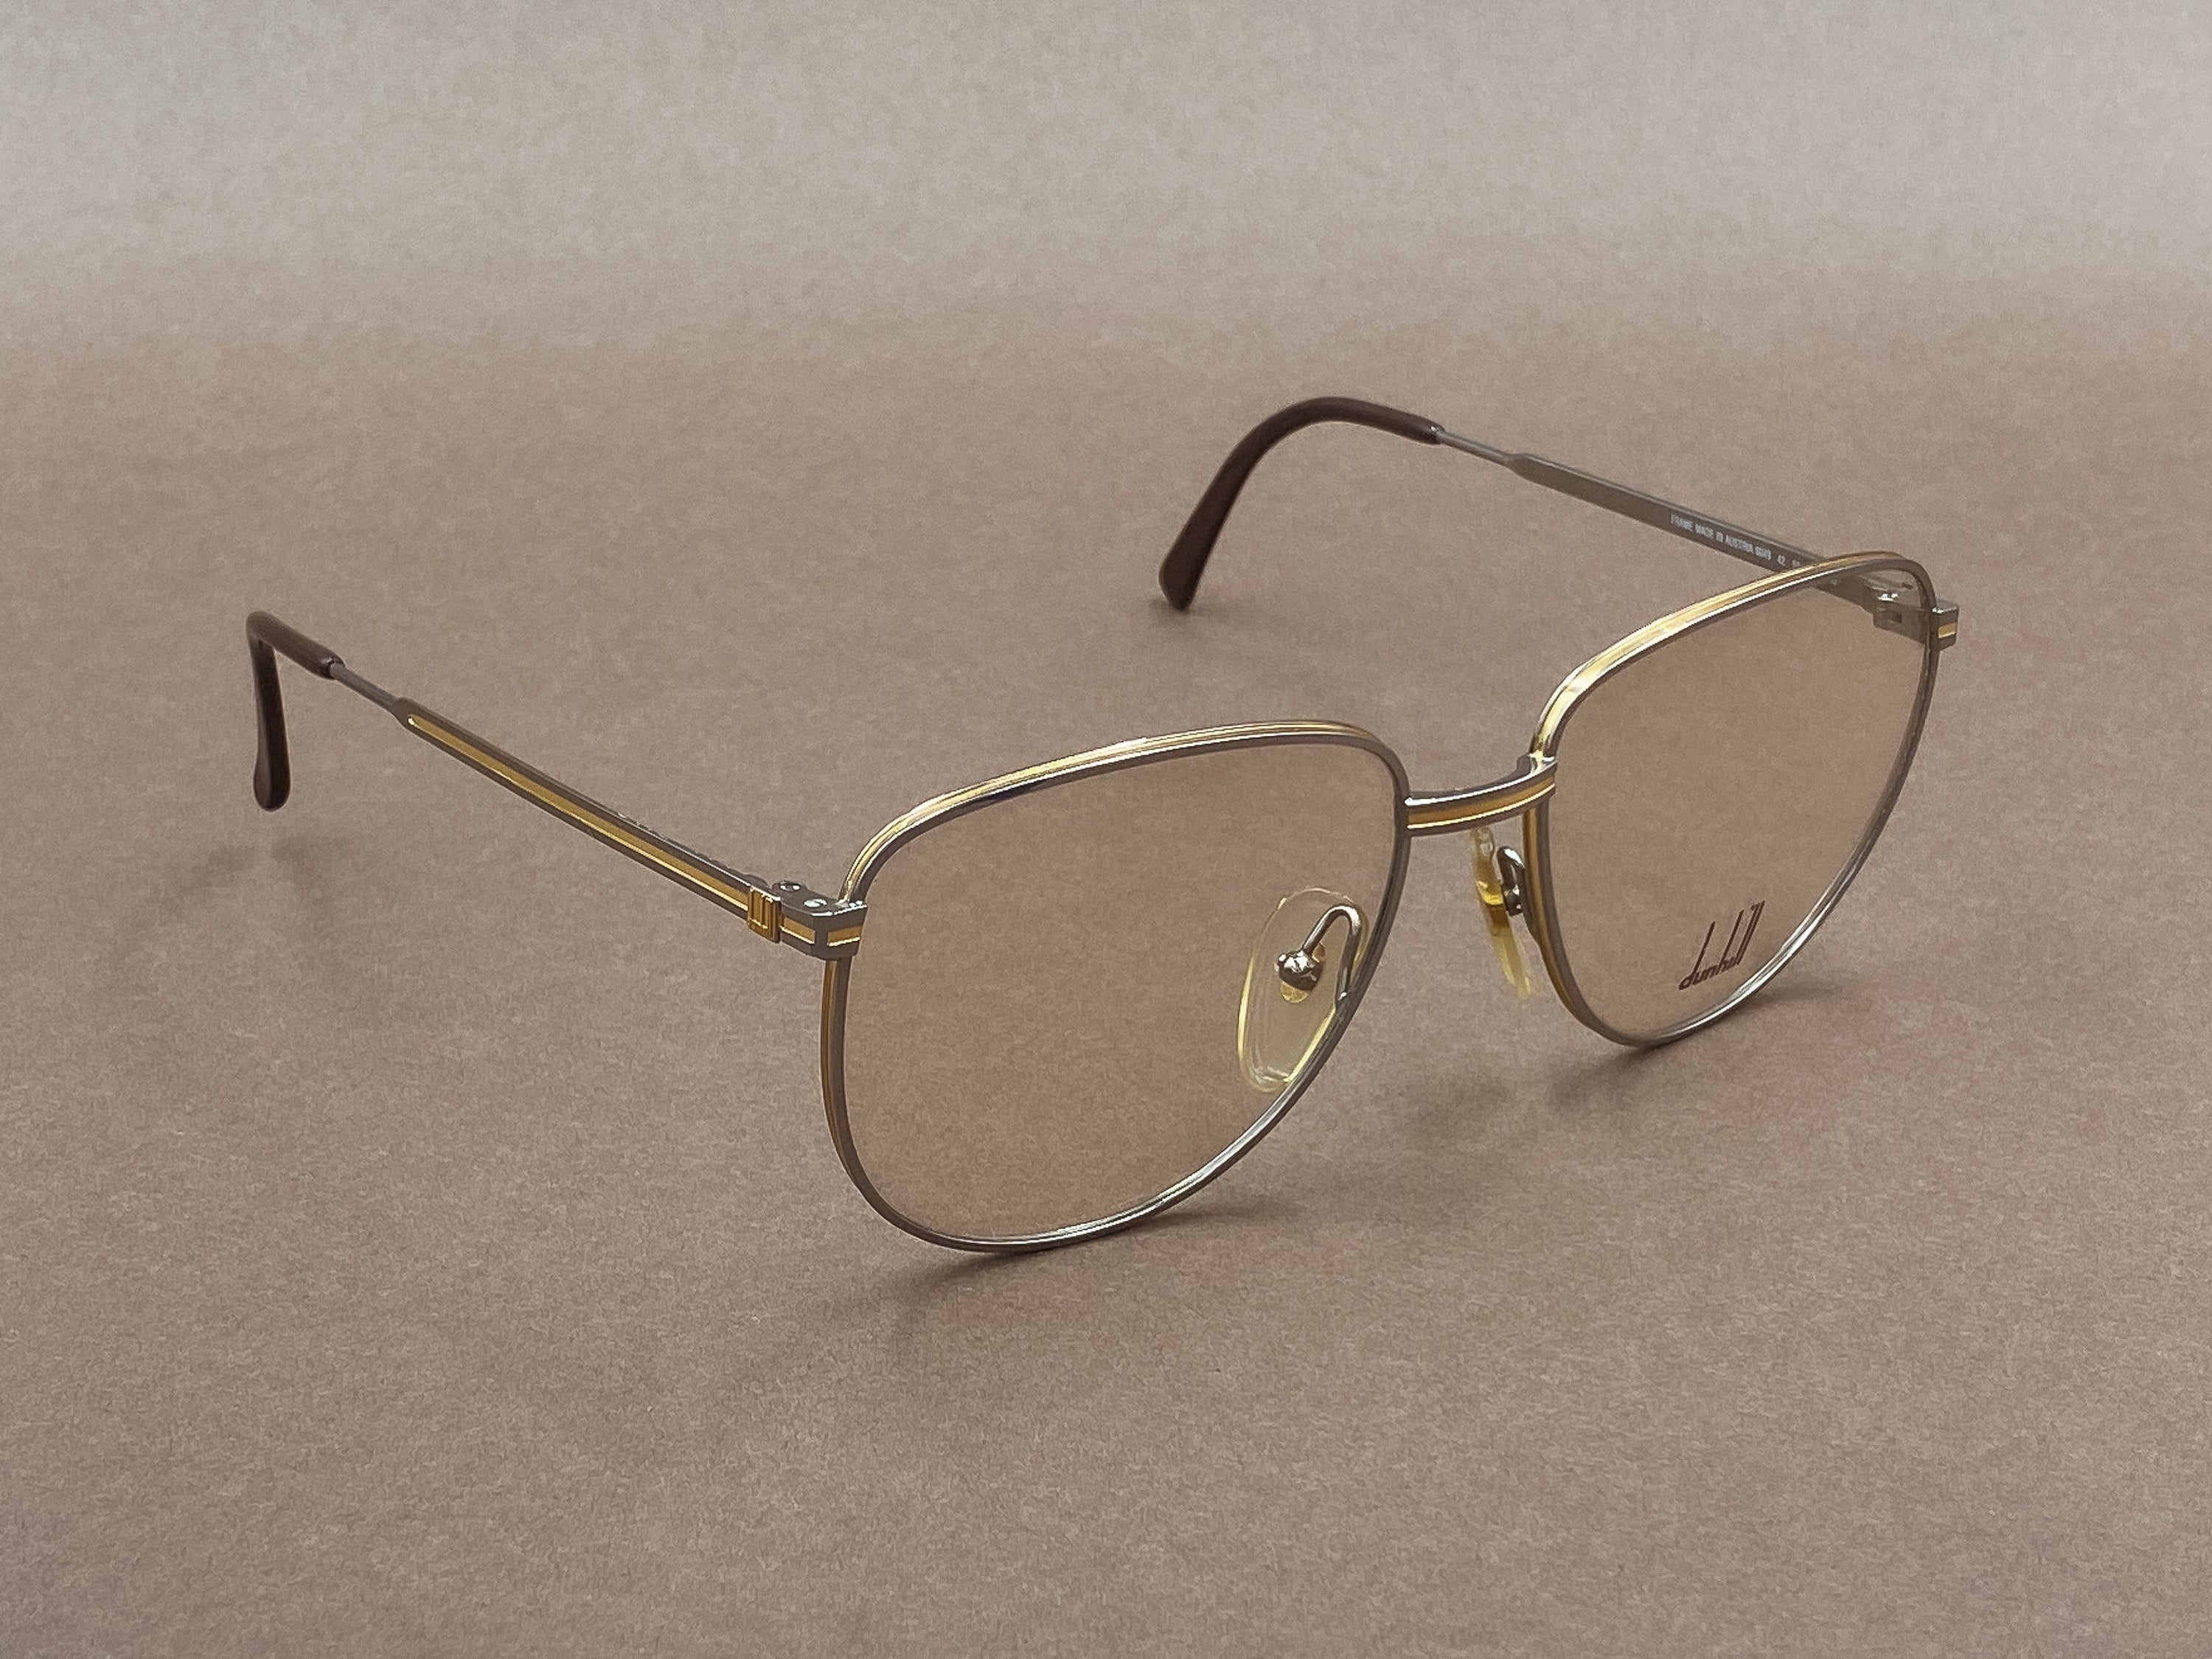 Dunhill 6049 glasses